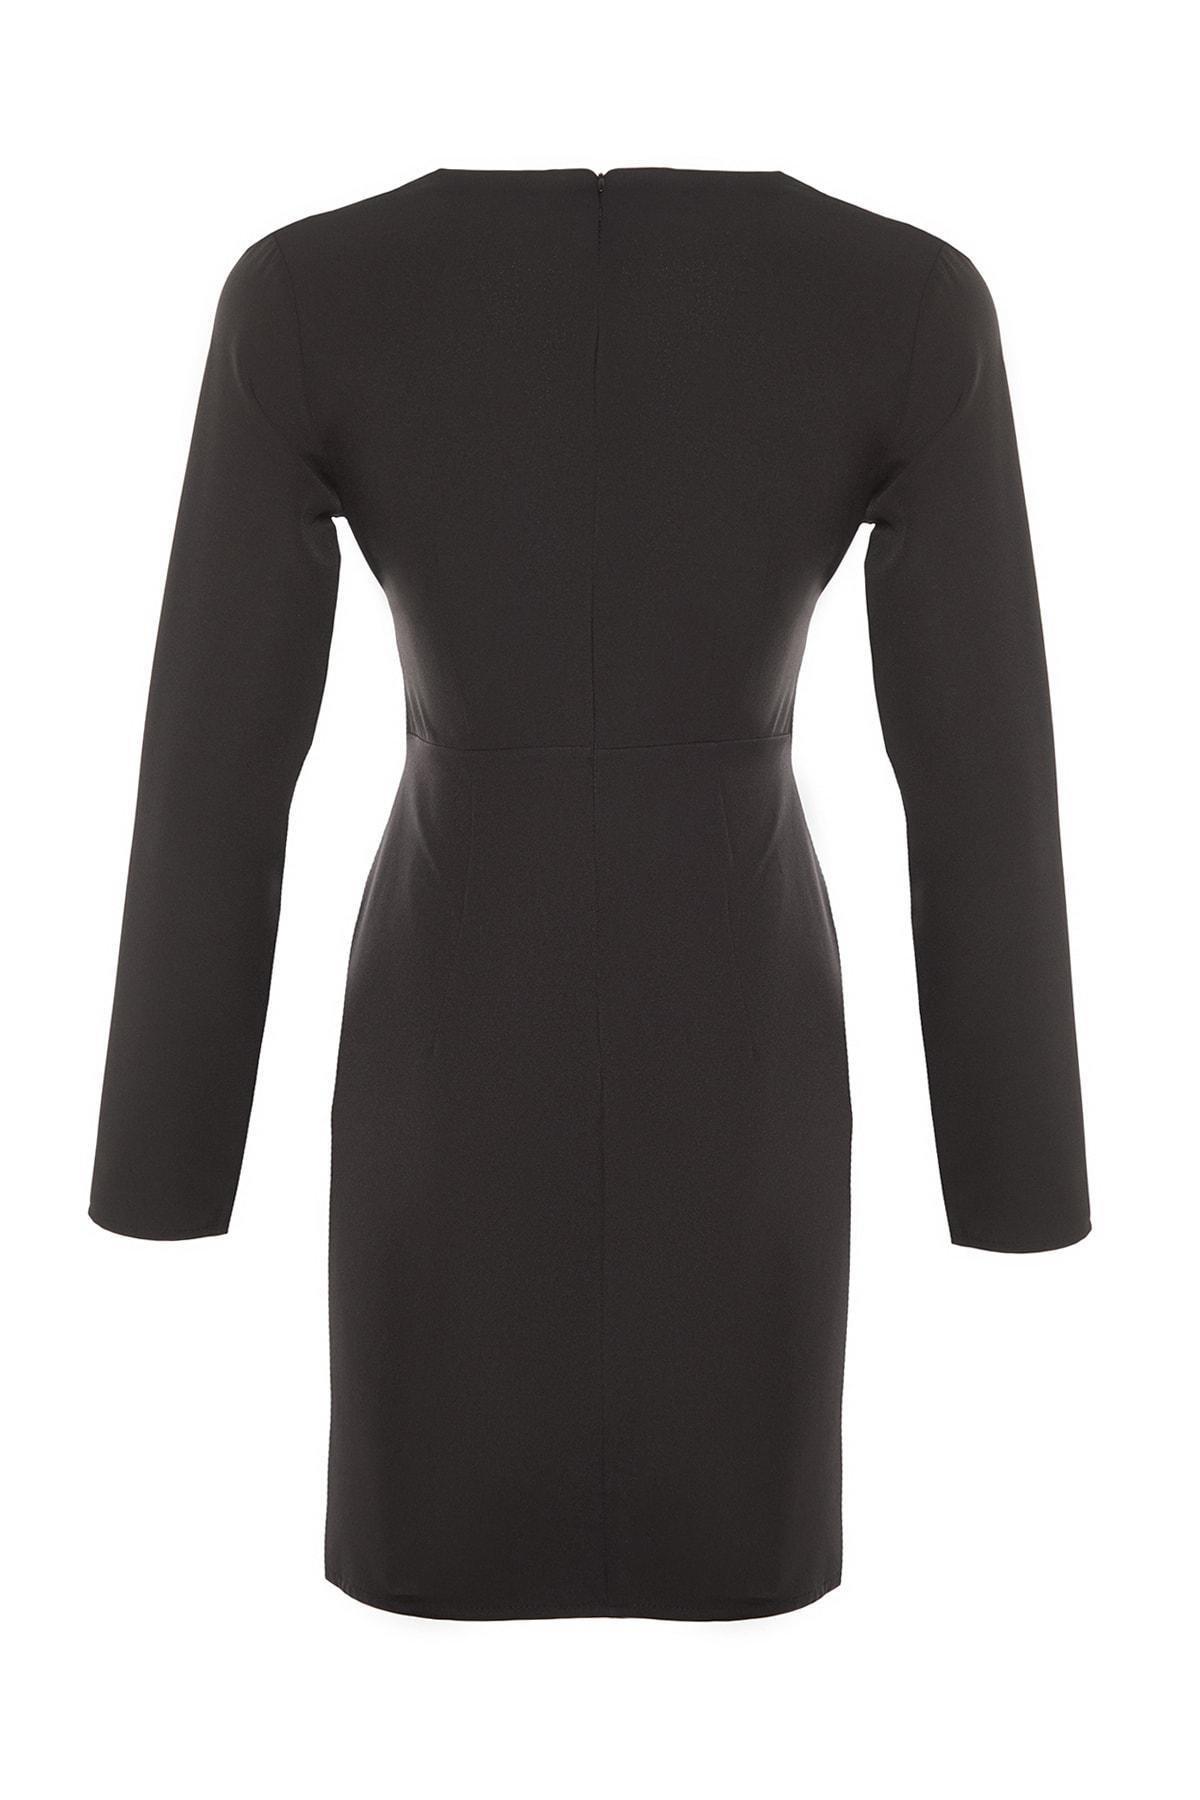 Trendyol - Black Wrapover Double-Breasted Dress